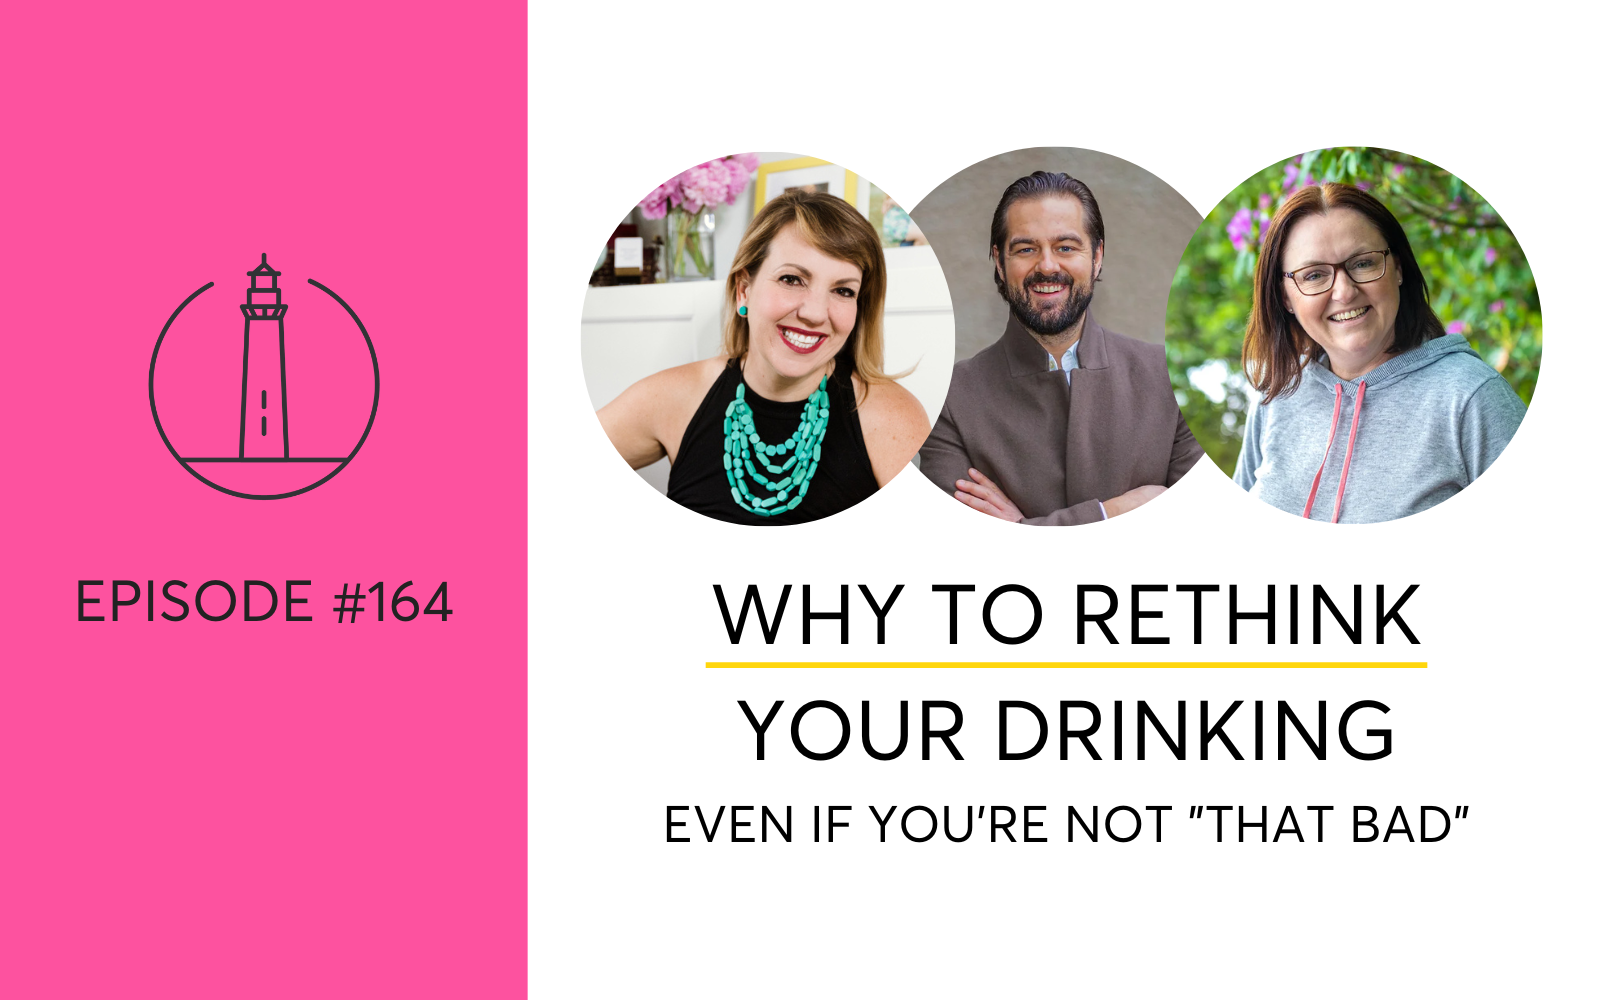 Rethink Your Drinking? Discover the Benefits of an Alcohol-Free Life